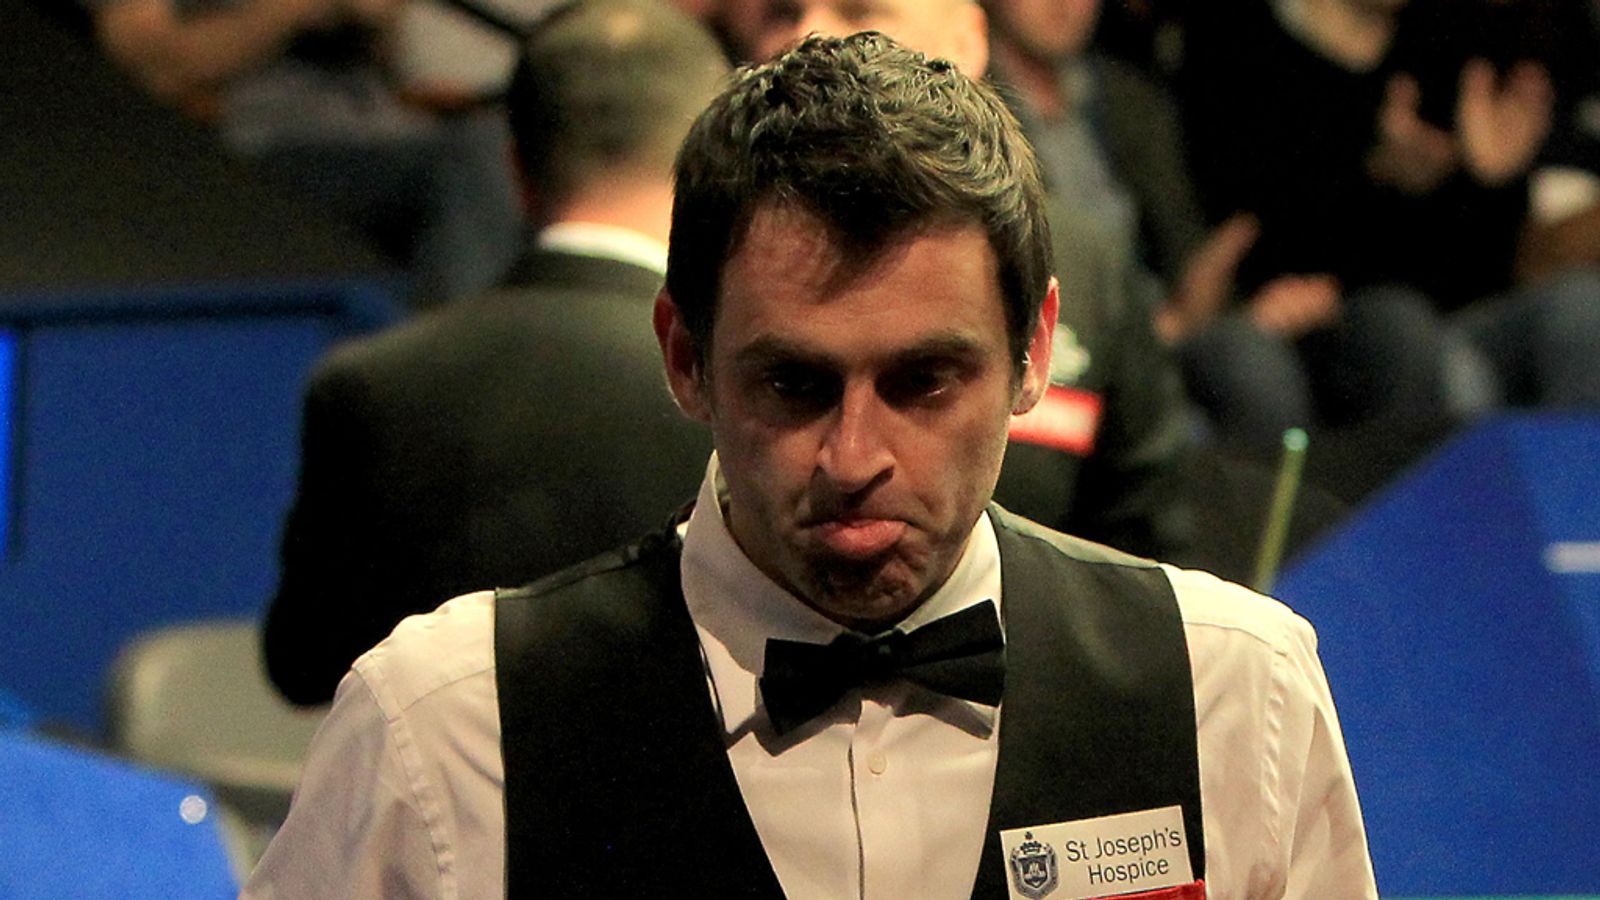 Ronnie O'Sullivan will not defend UK Championship title in York | Snooker News | Sky Sports